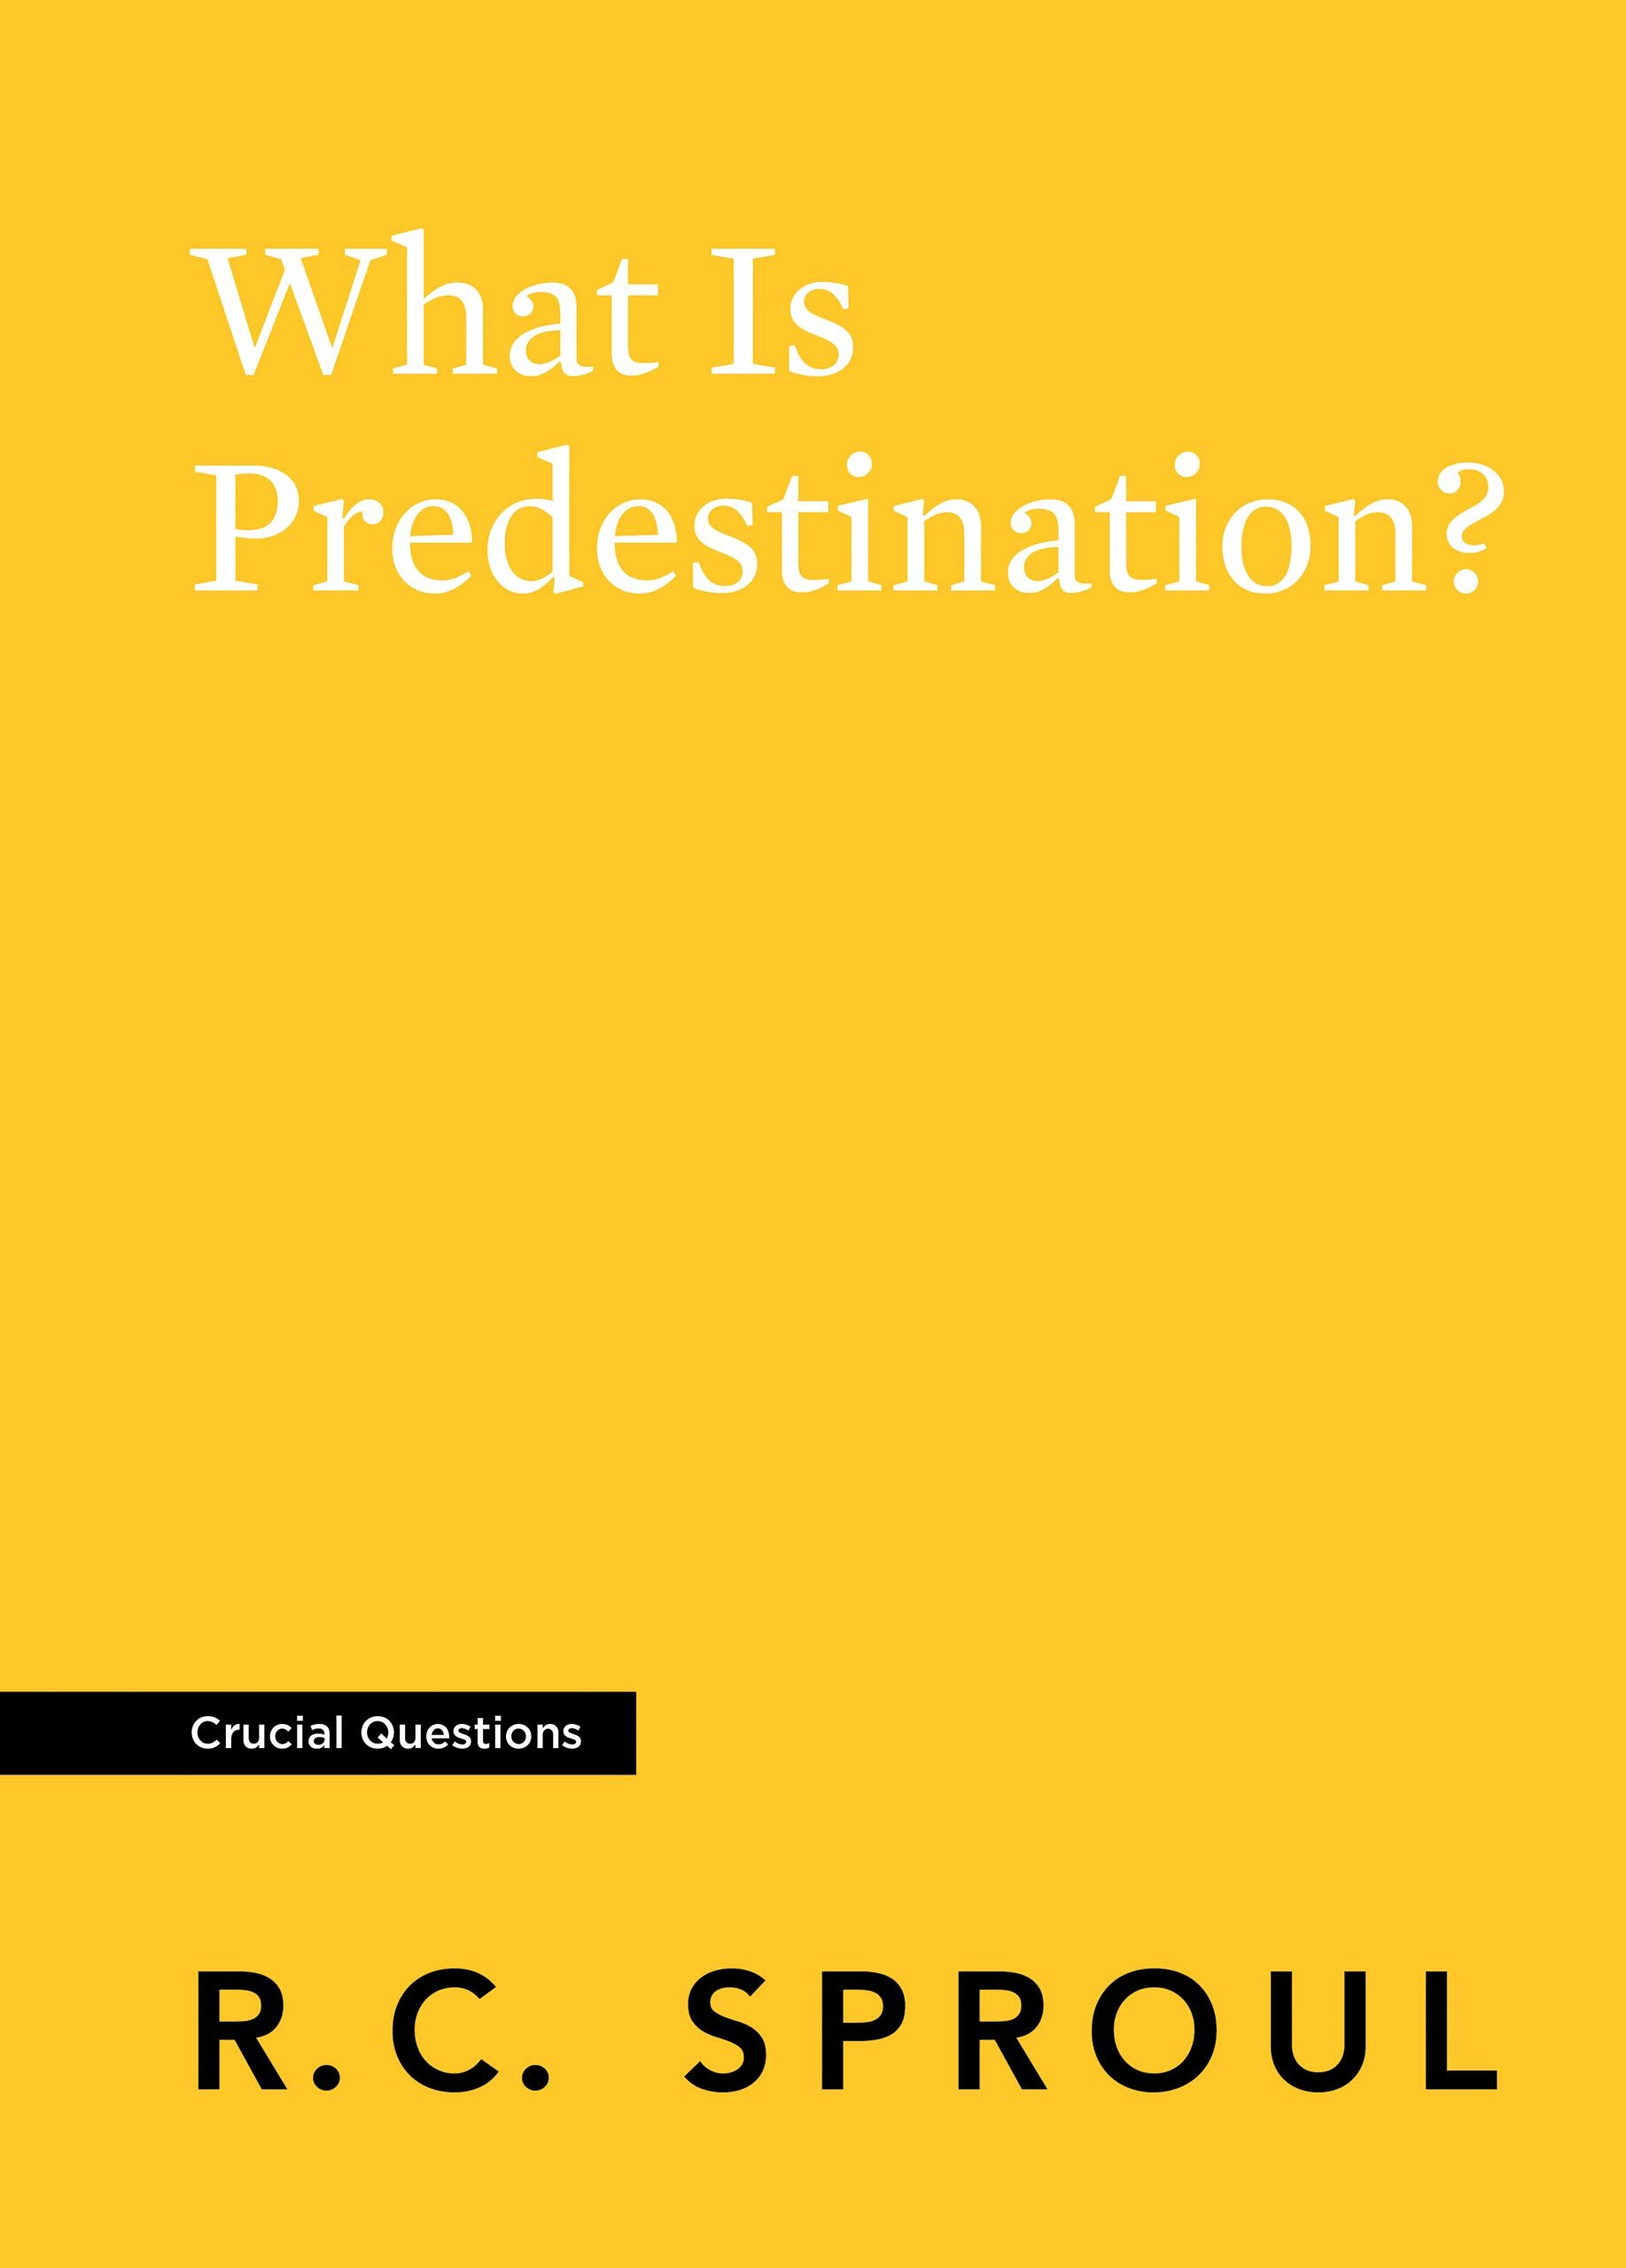 What Is Predestination? (Crucial Questions)